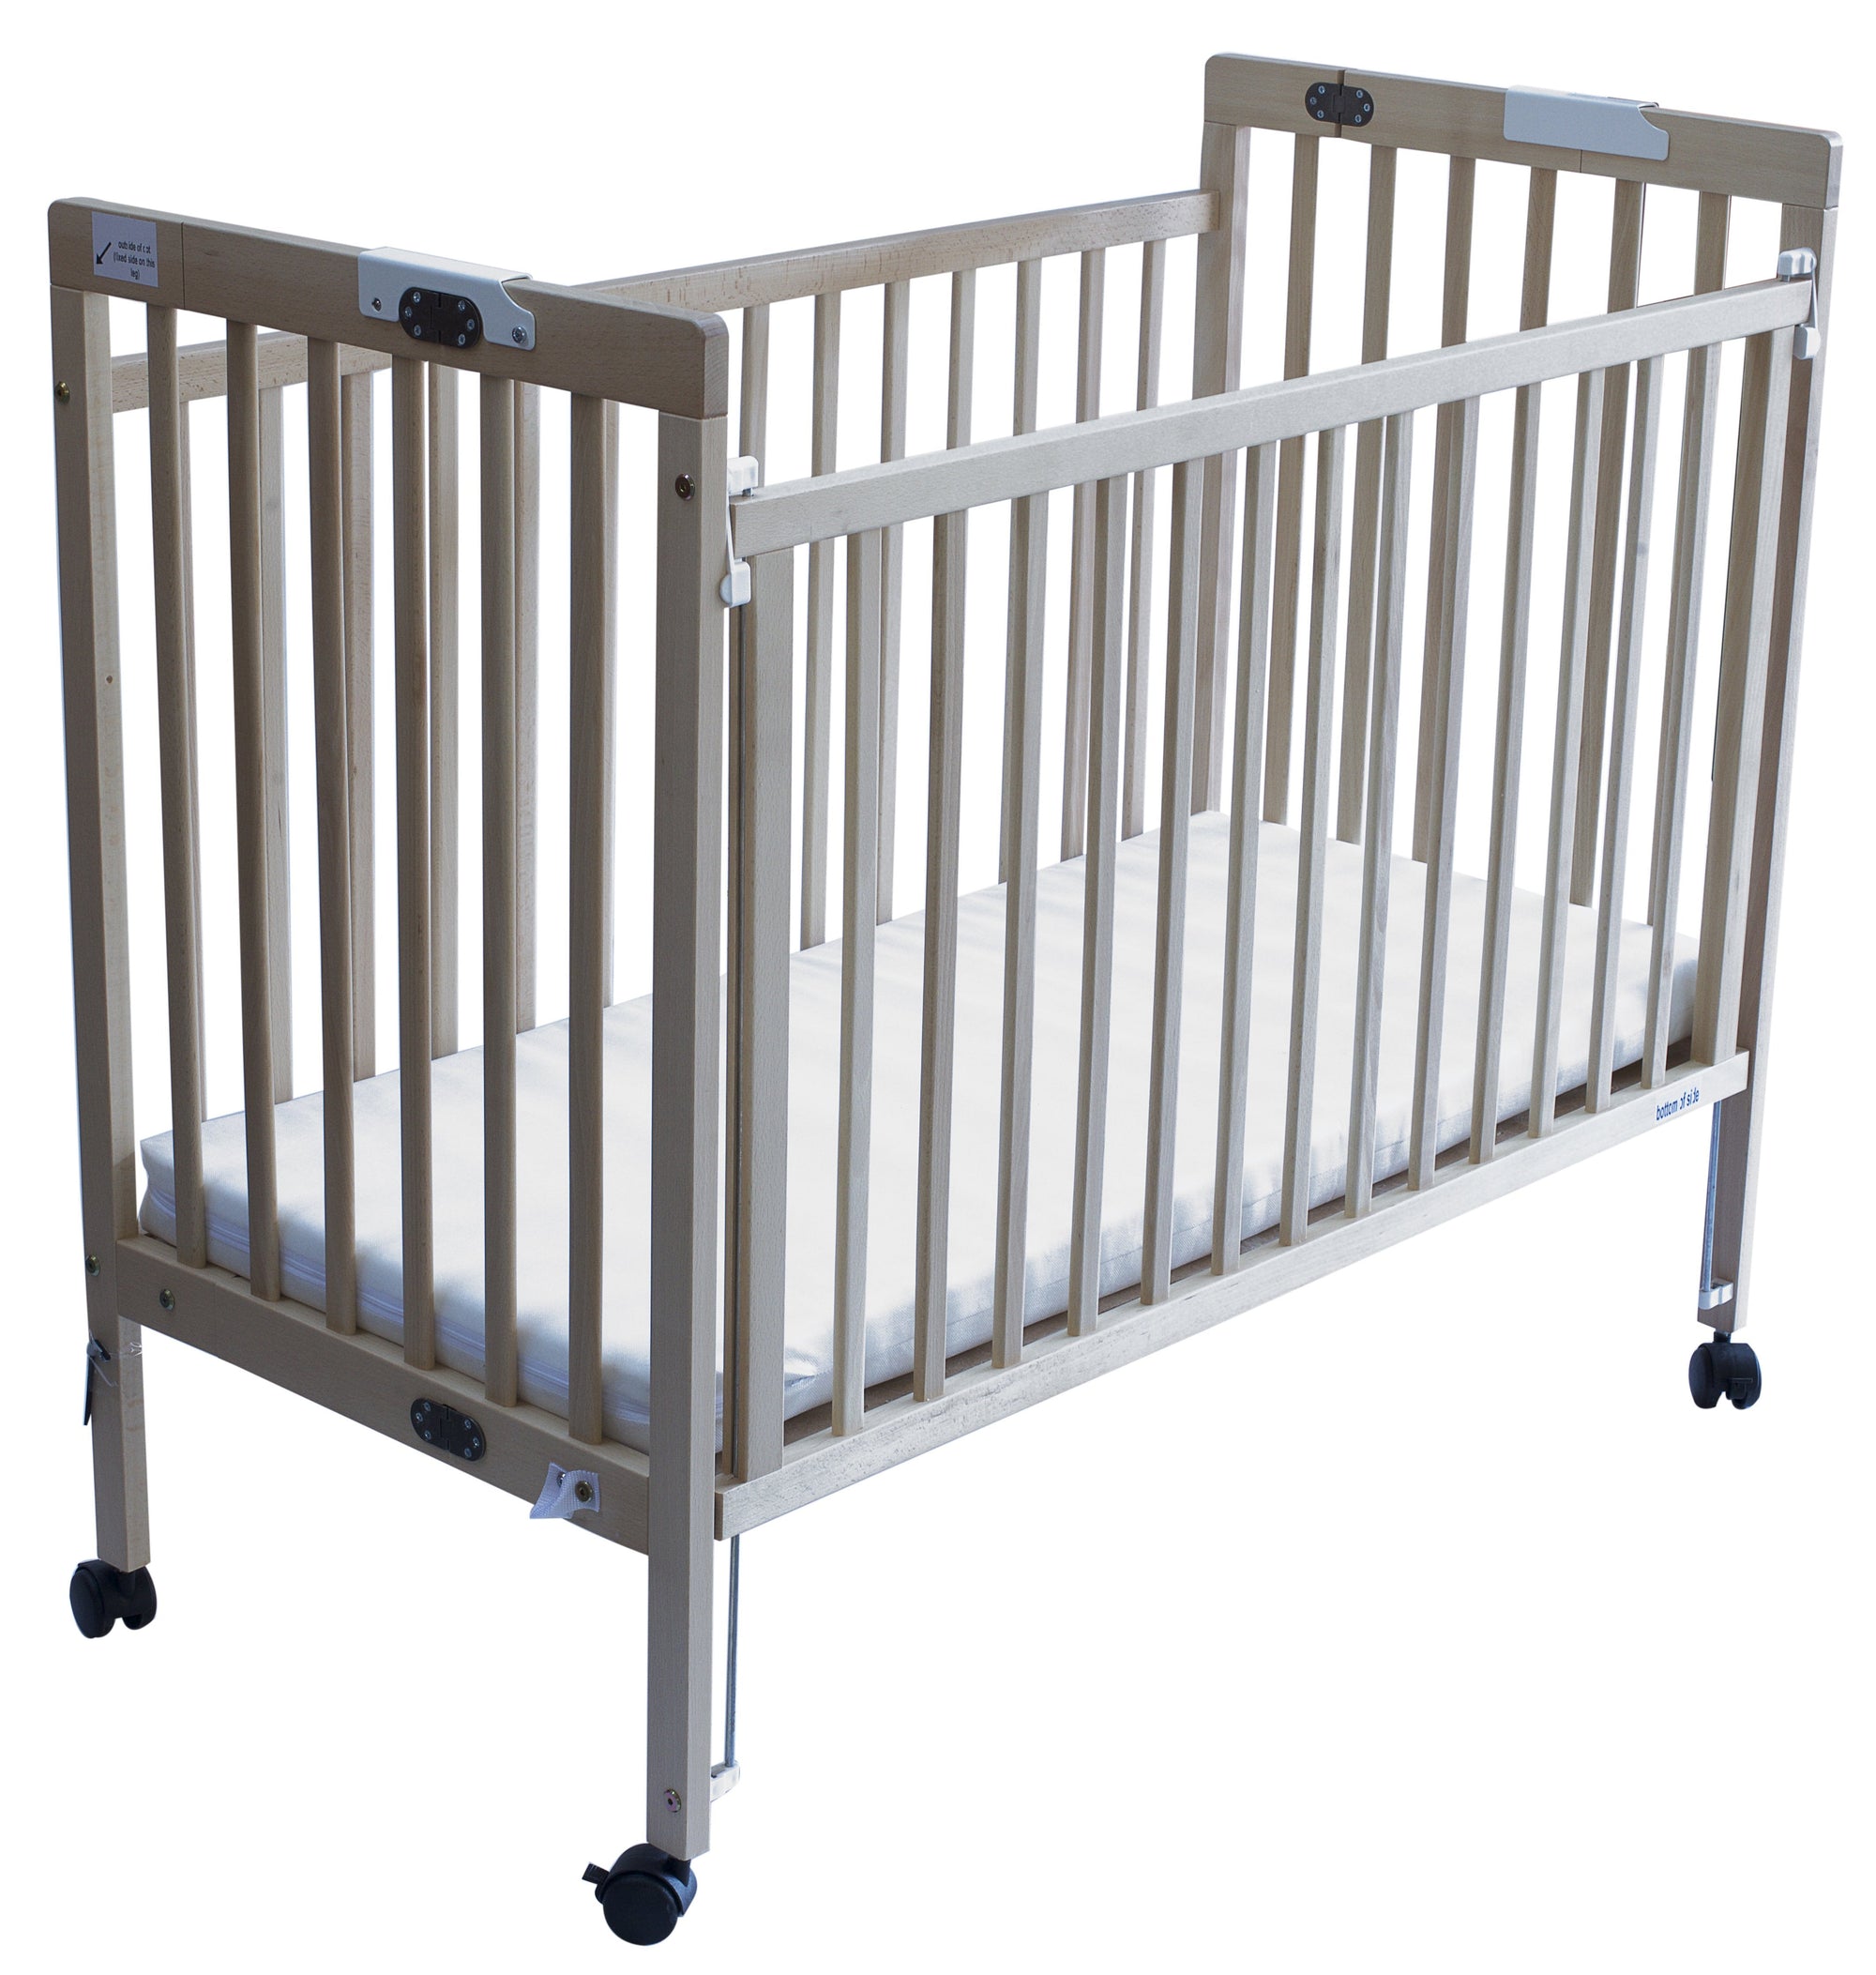 Kentford Folding Children's Cot-Helo-Contract Furniture Store